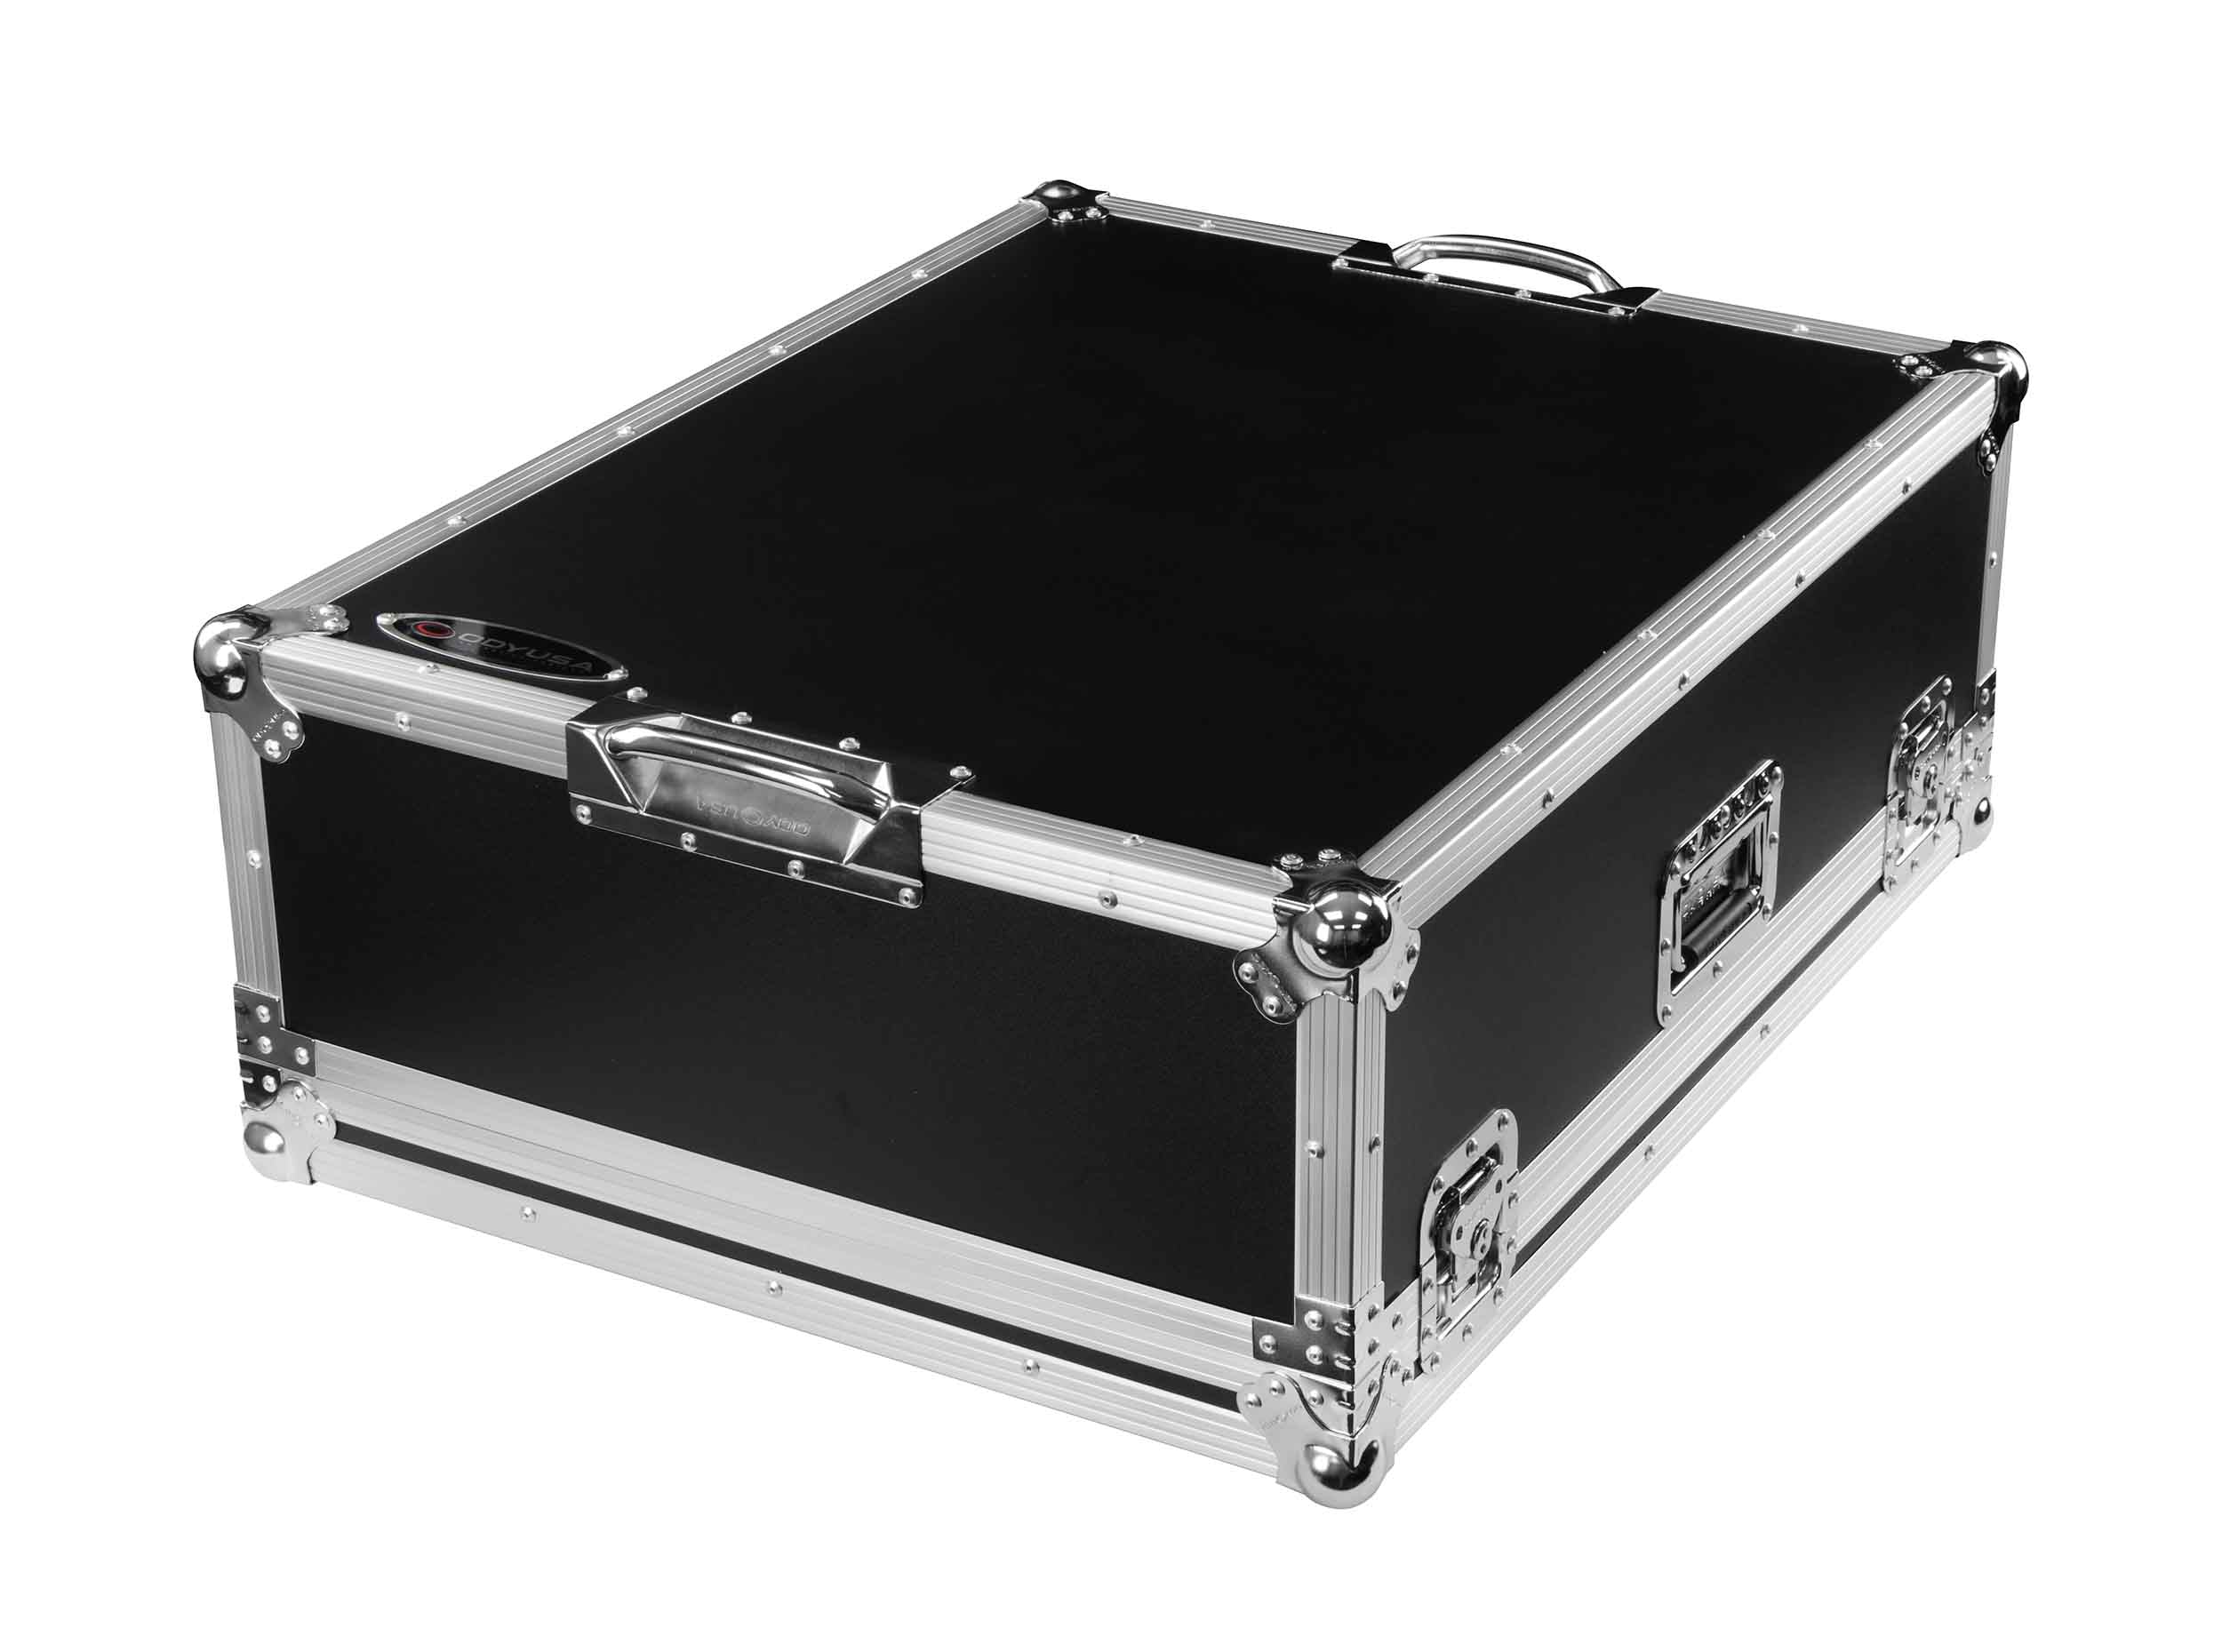 Odyssey FZSONICVIEW24, Flight Case for TASCAM Sonic View 24 Mixing Console by Odyssey